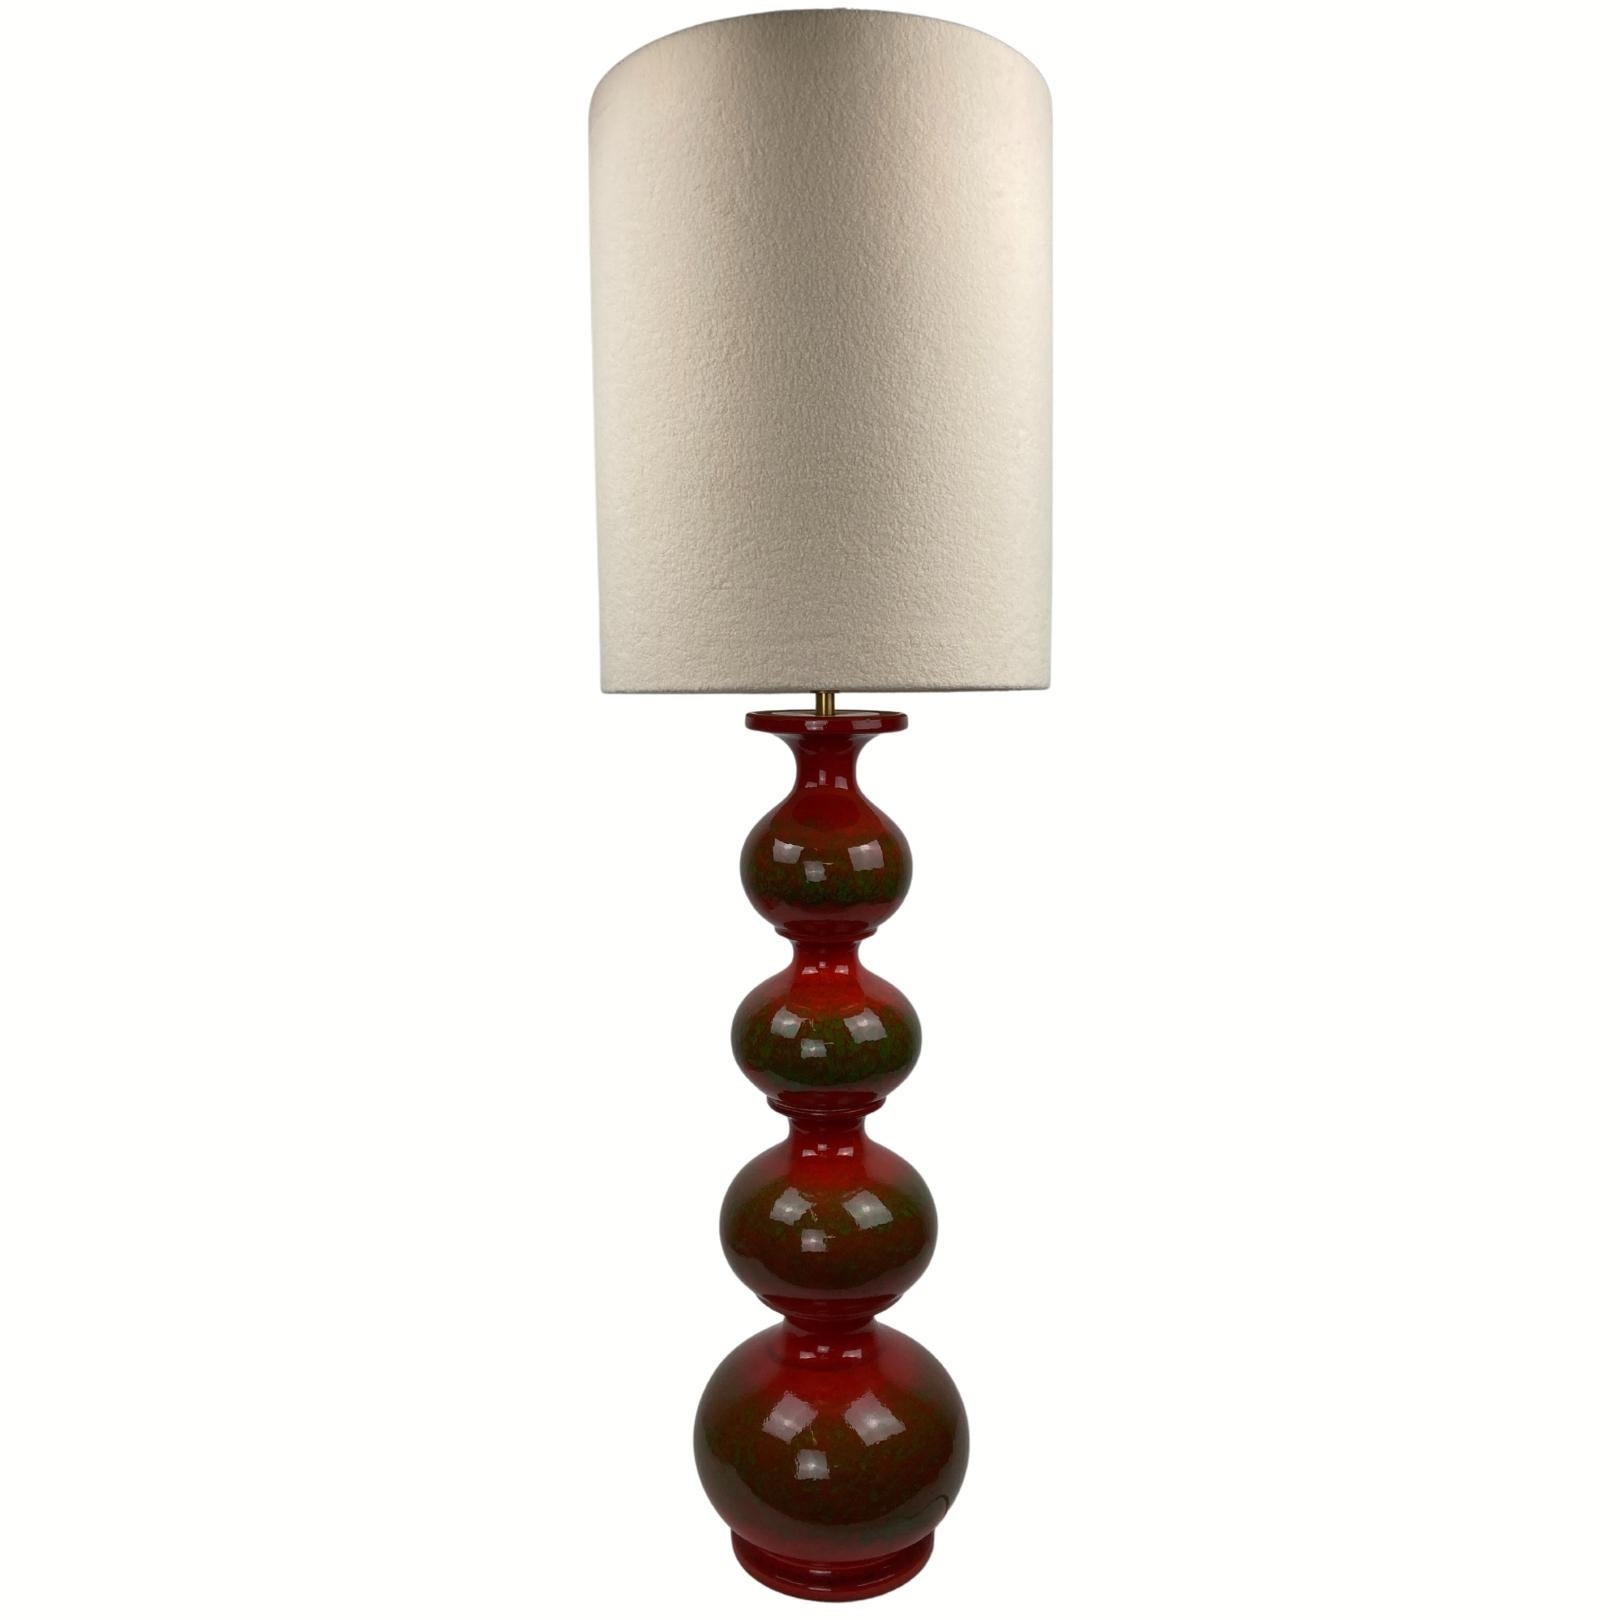 Ceramic bubbly wavy floor or table lamp by Kaiser Leuchten, 1960s For Sale 12